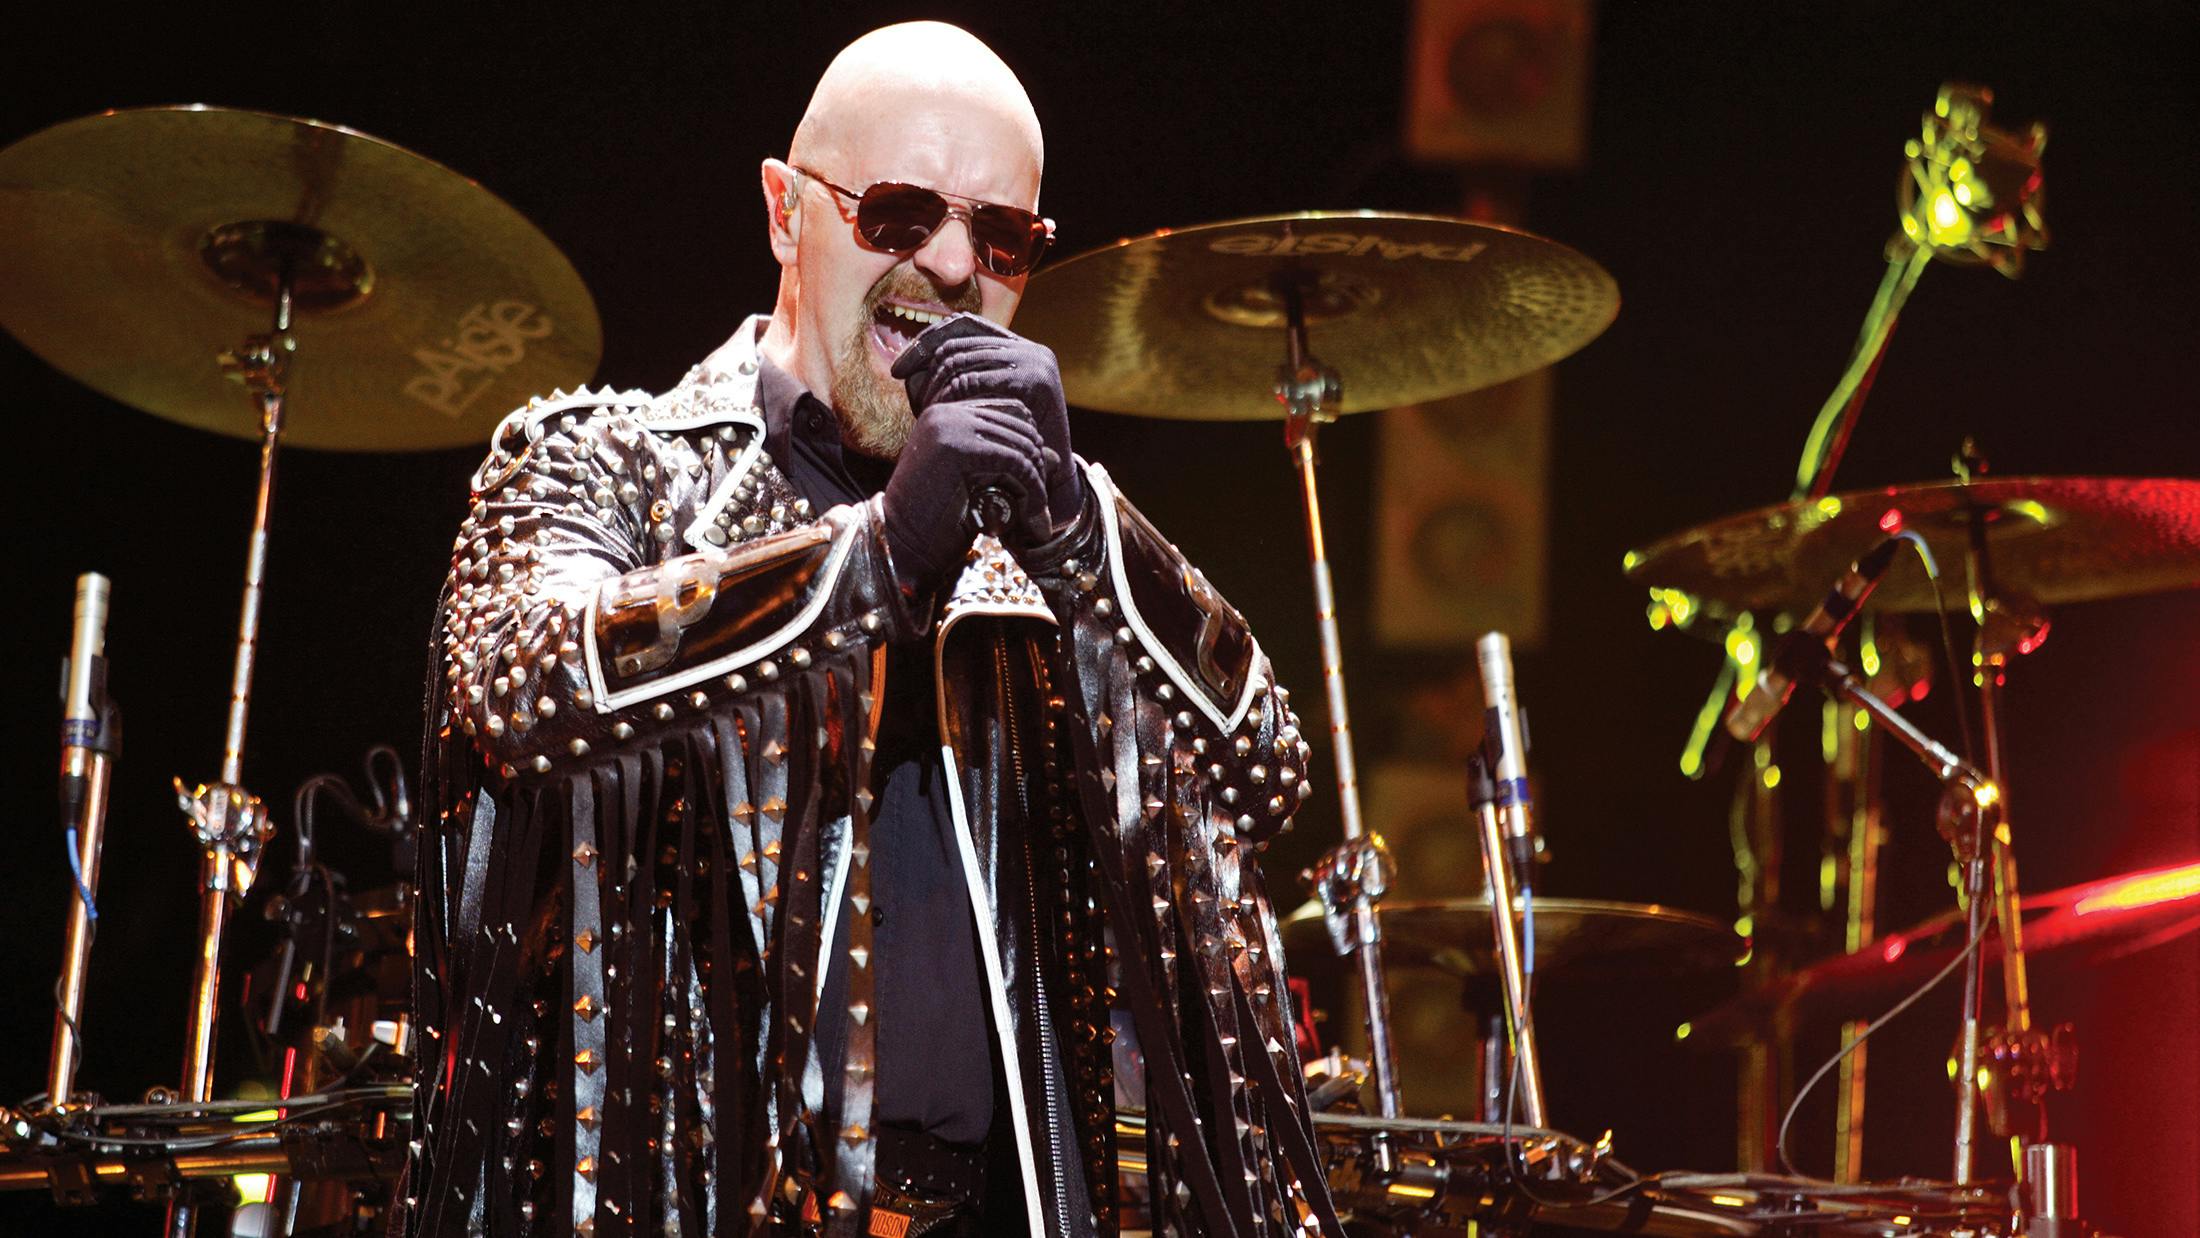 Listen To Rob Halford Performing Hark! The Herald Angels Sing